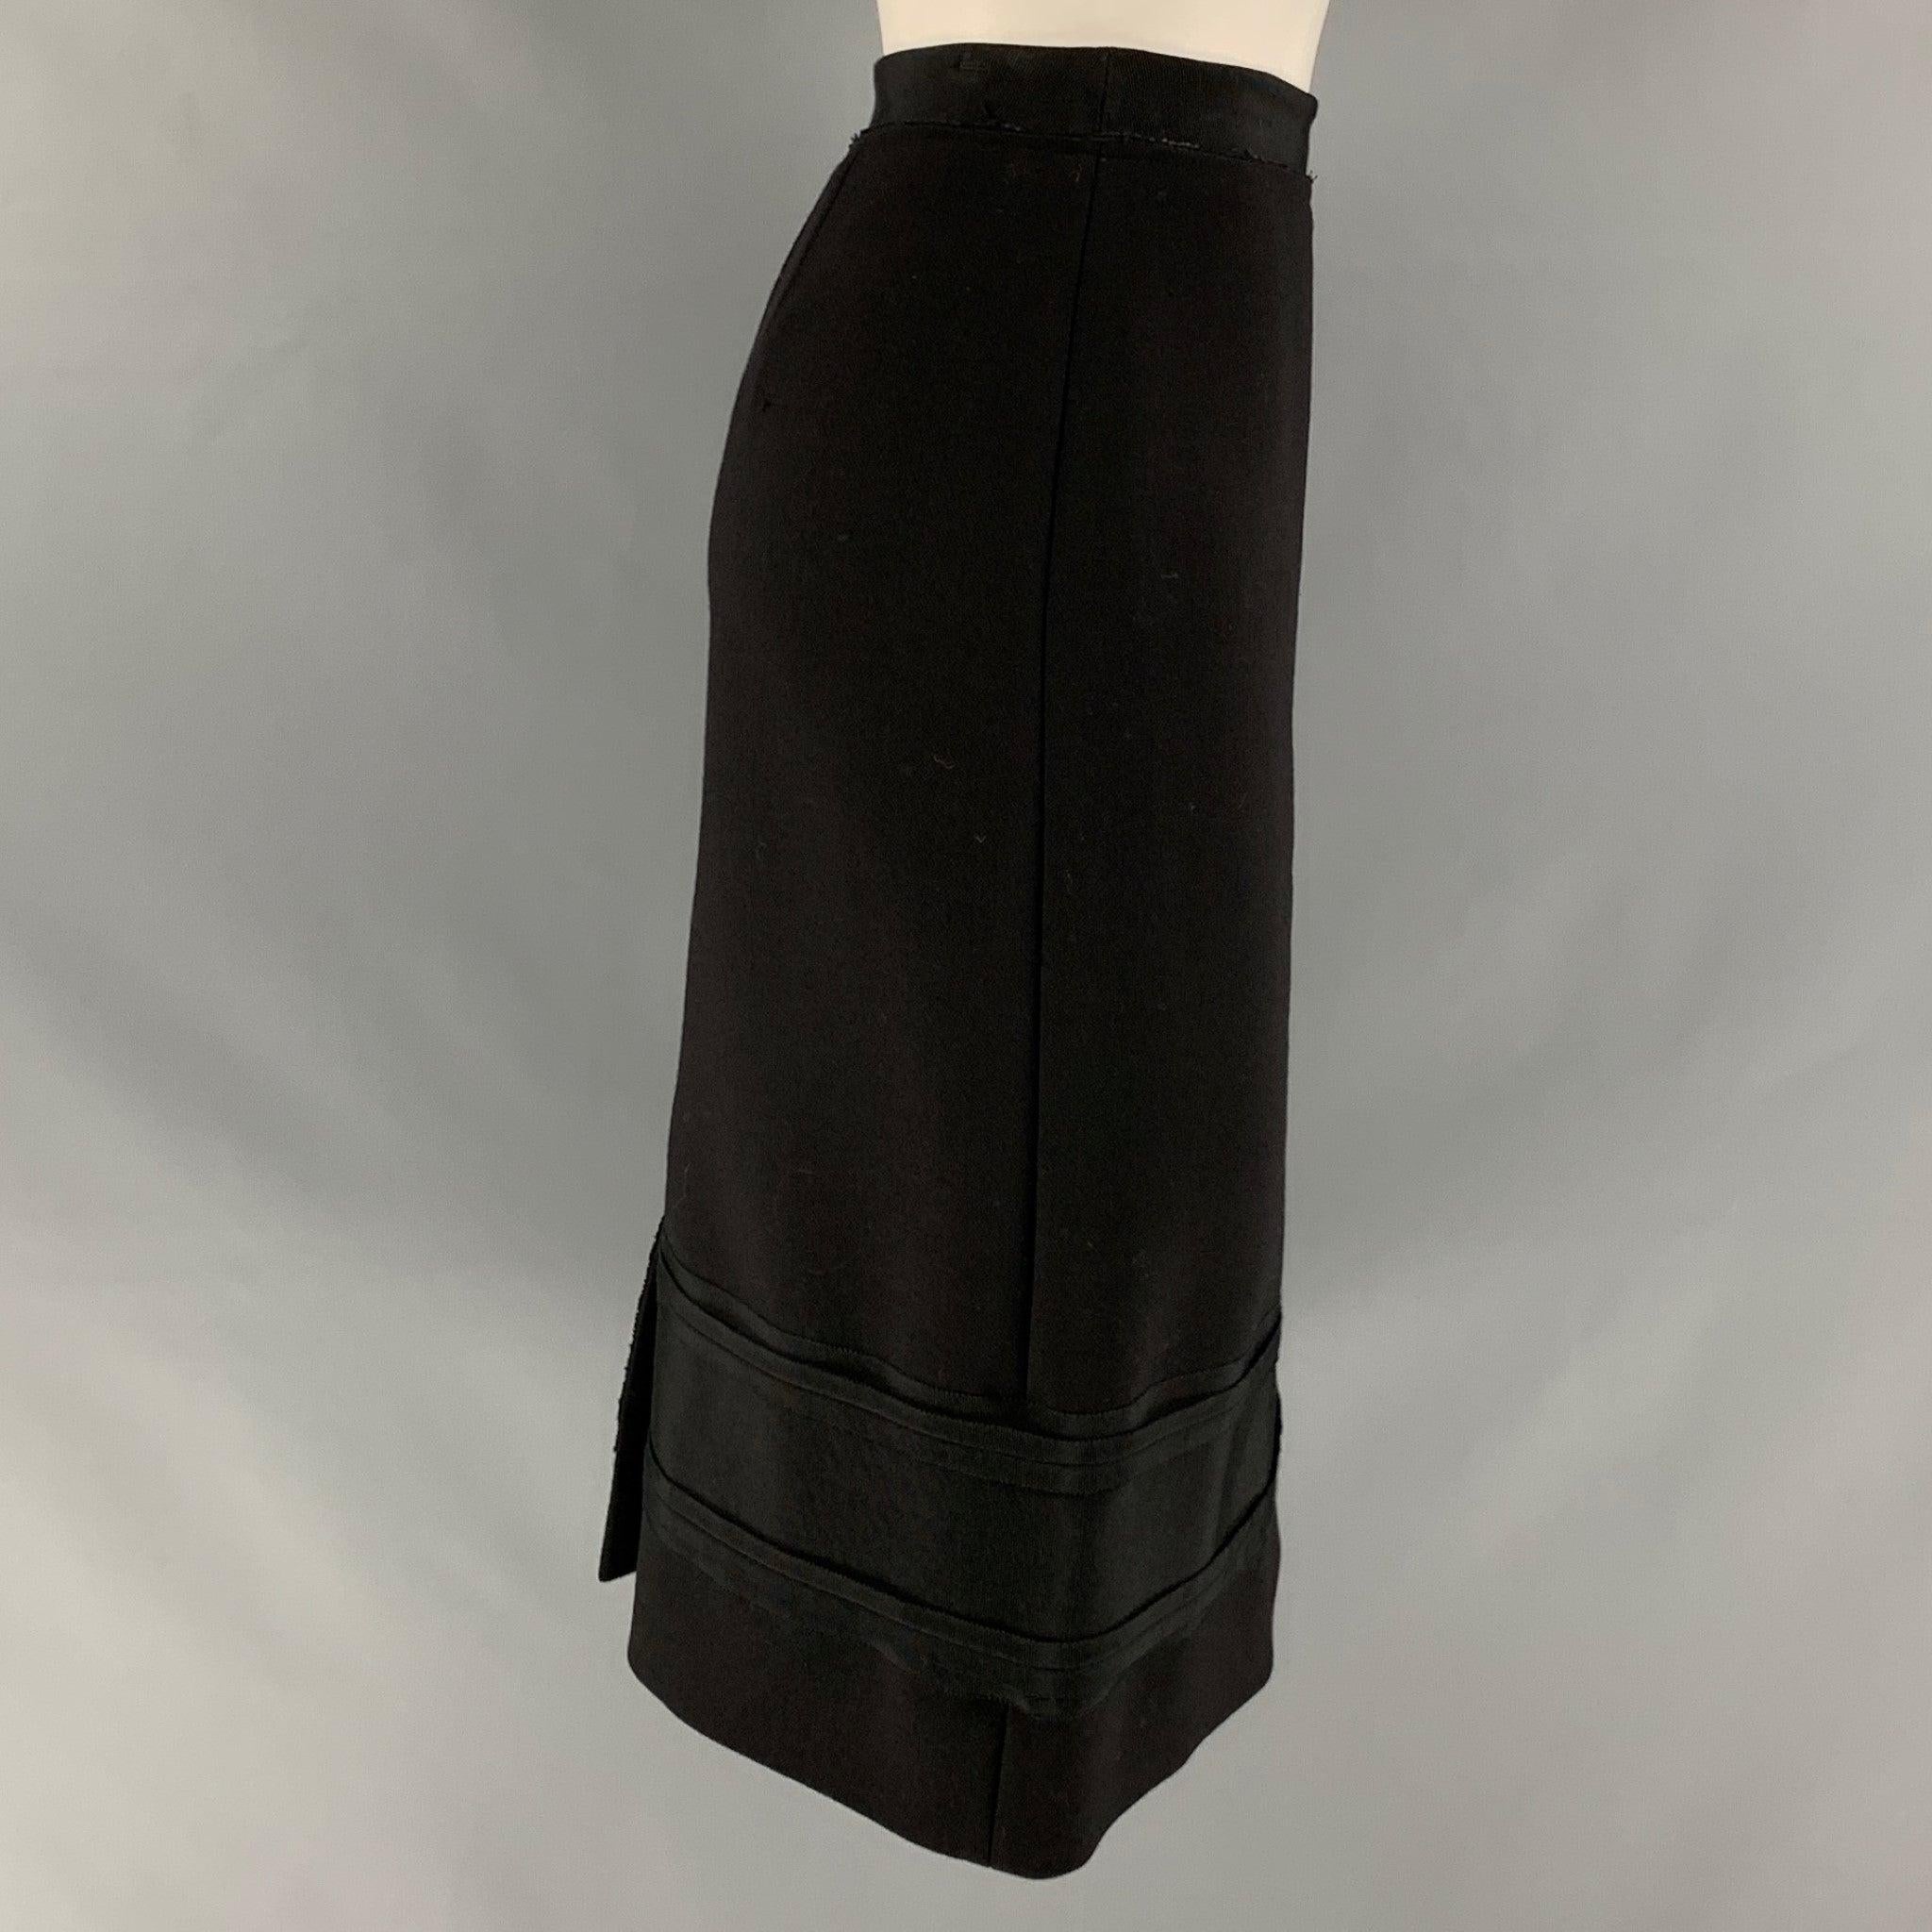 PRADA knee length skirt comes in a black wool mixed materials featuring a pencil style, back zipper closure, and grosgrain ribbon hem details. Made in Italy.Very Good Pre-Owned Condition. 

Marked:   42 

Measurements: 
  Waist: 30 inches  Hip: 40